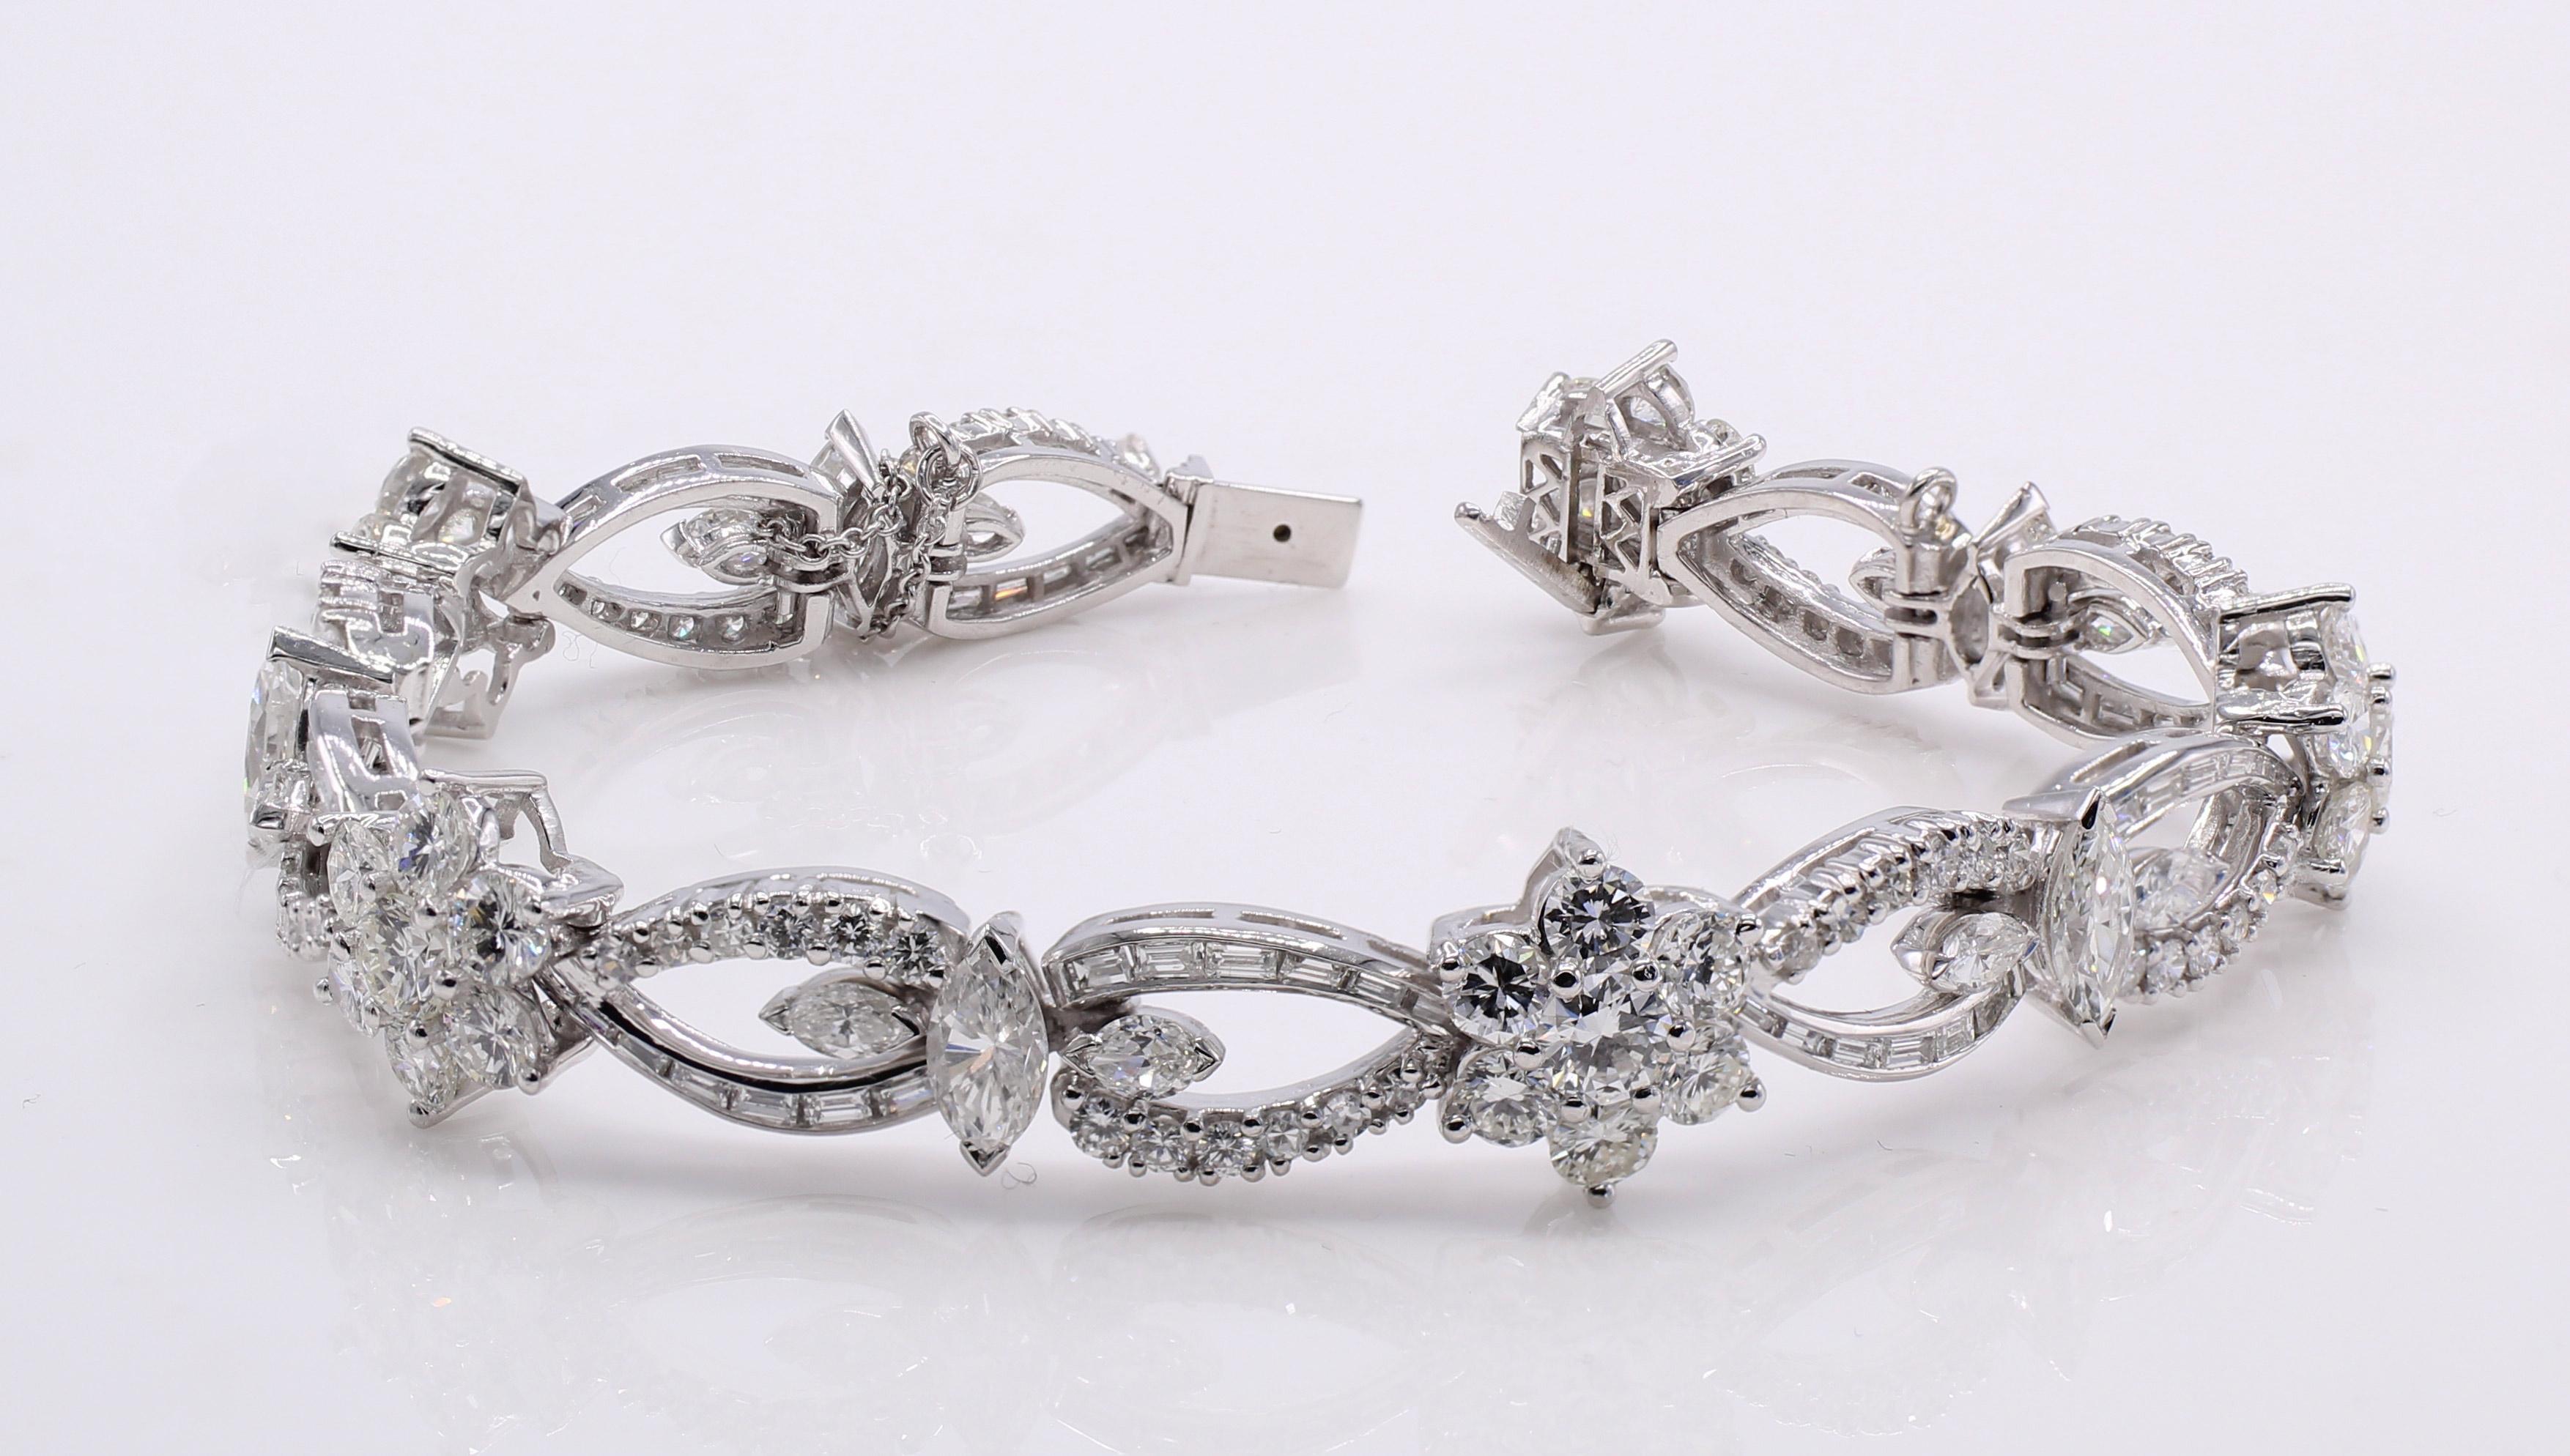 Beautifully designed and masterfully handcrafted, this 1960s platinum bracelet is decoratively set with round, marquis and baguette cut diamonds. The flexible sections sparkle and shine with the high quality perfectly matched diamonds with and